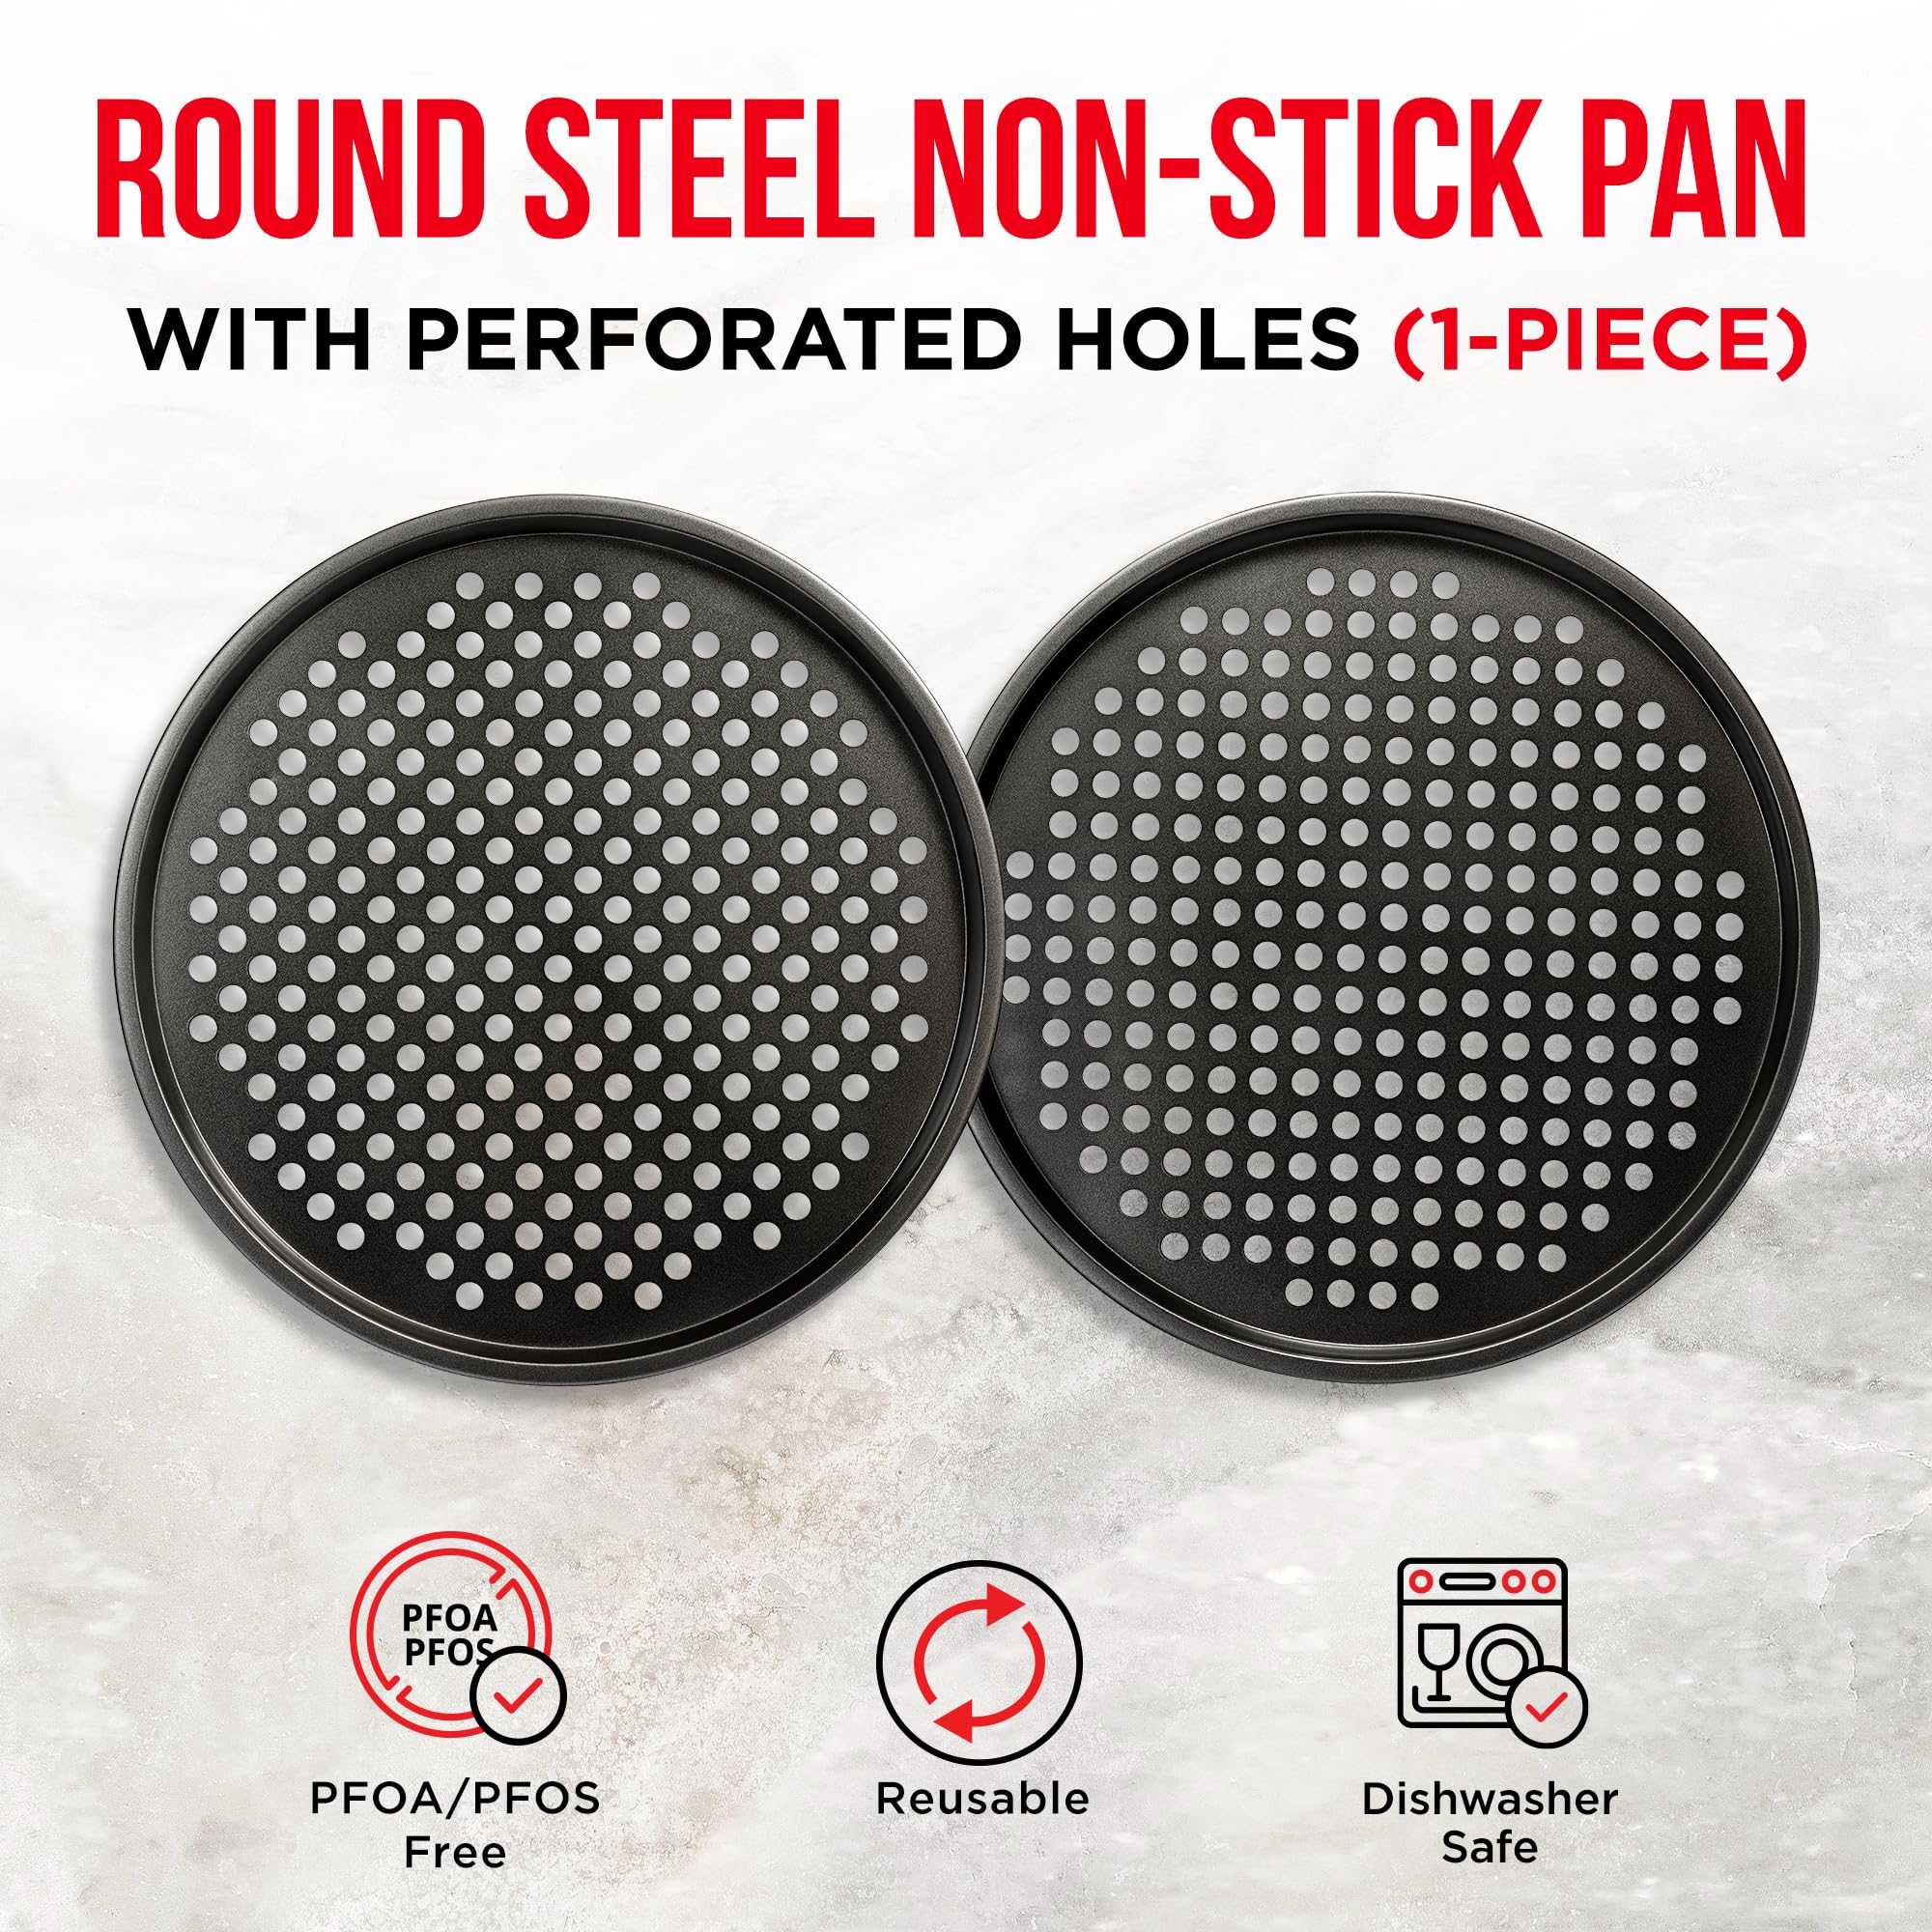 Bakken- Swiss Non-Stick Pizza Pan with Holes - 13-Inch Perforated Pizza Crisper Carbon Steel Pizza Pan - 2 Round Pizza Trays with Silicone Handles PFOA PFOS and PTFE Free